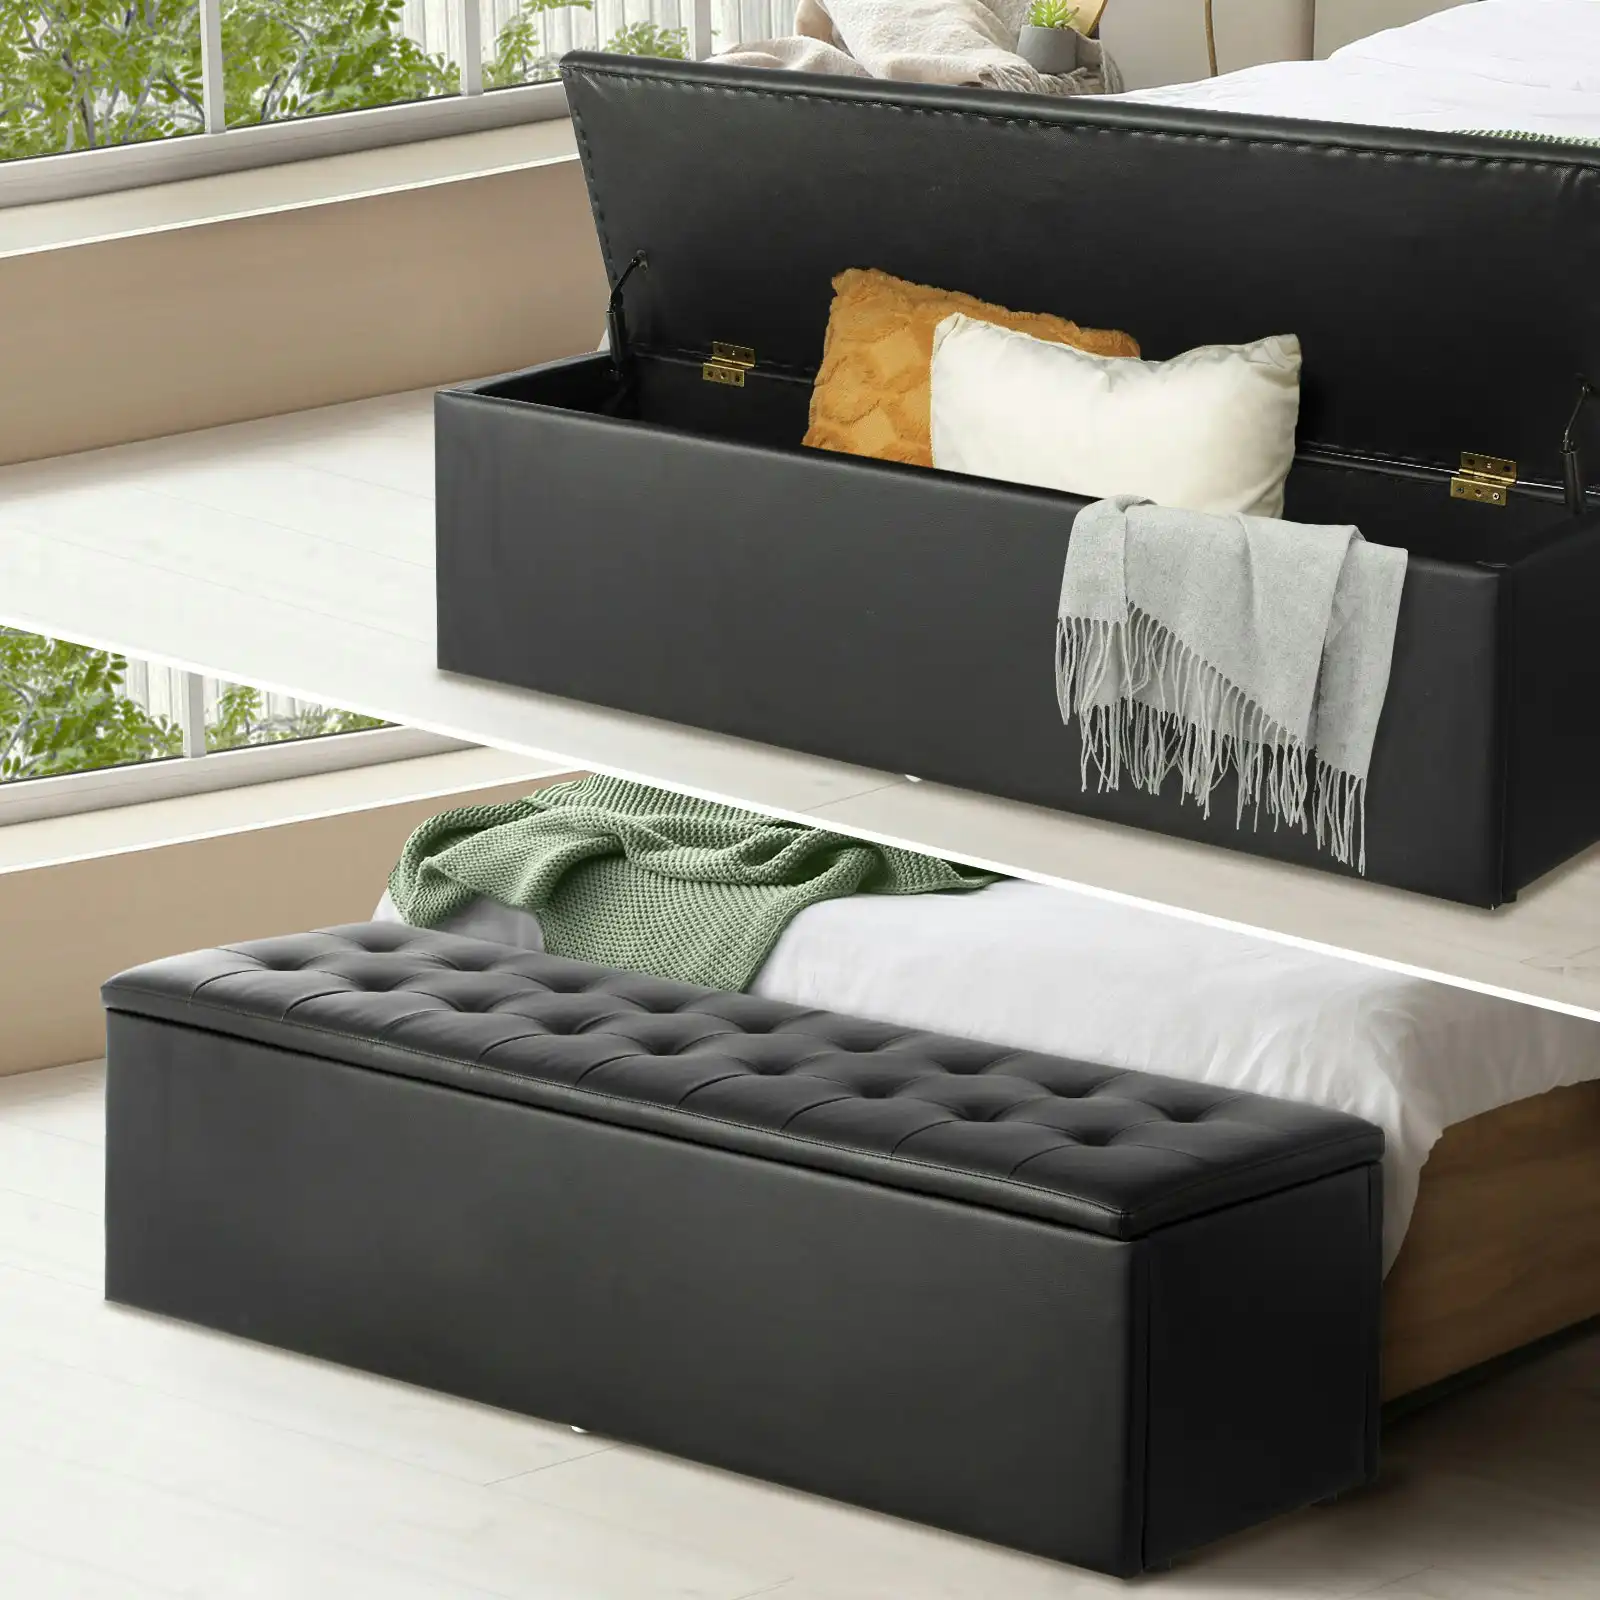 Oikiture Storage Ottoman Blanket Box Foot Stool XL Chest Toy PU Leather Black